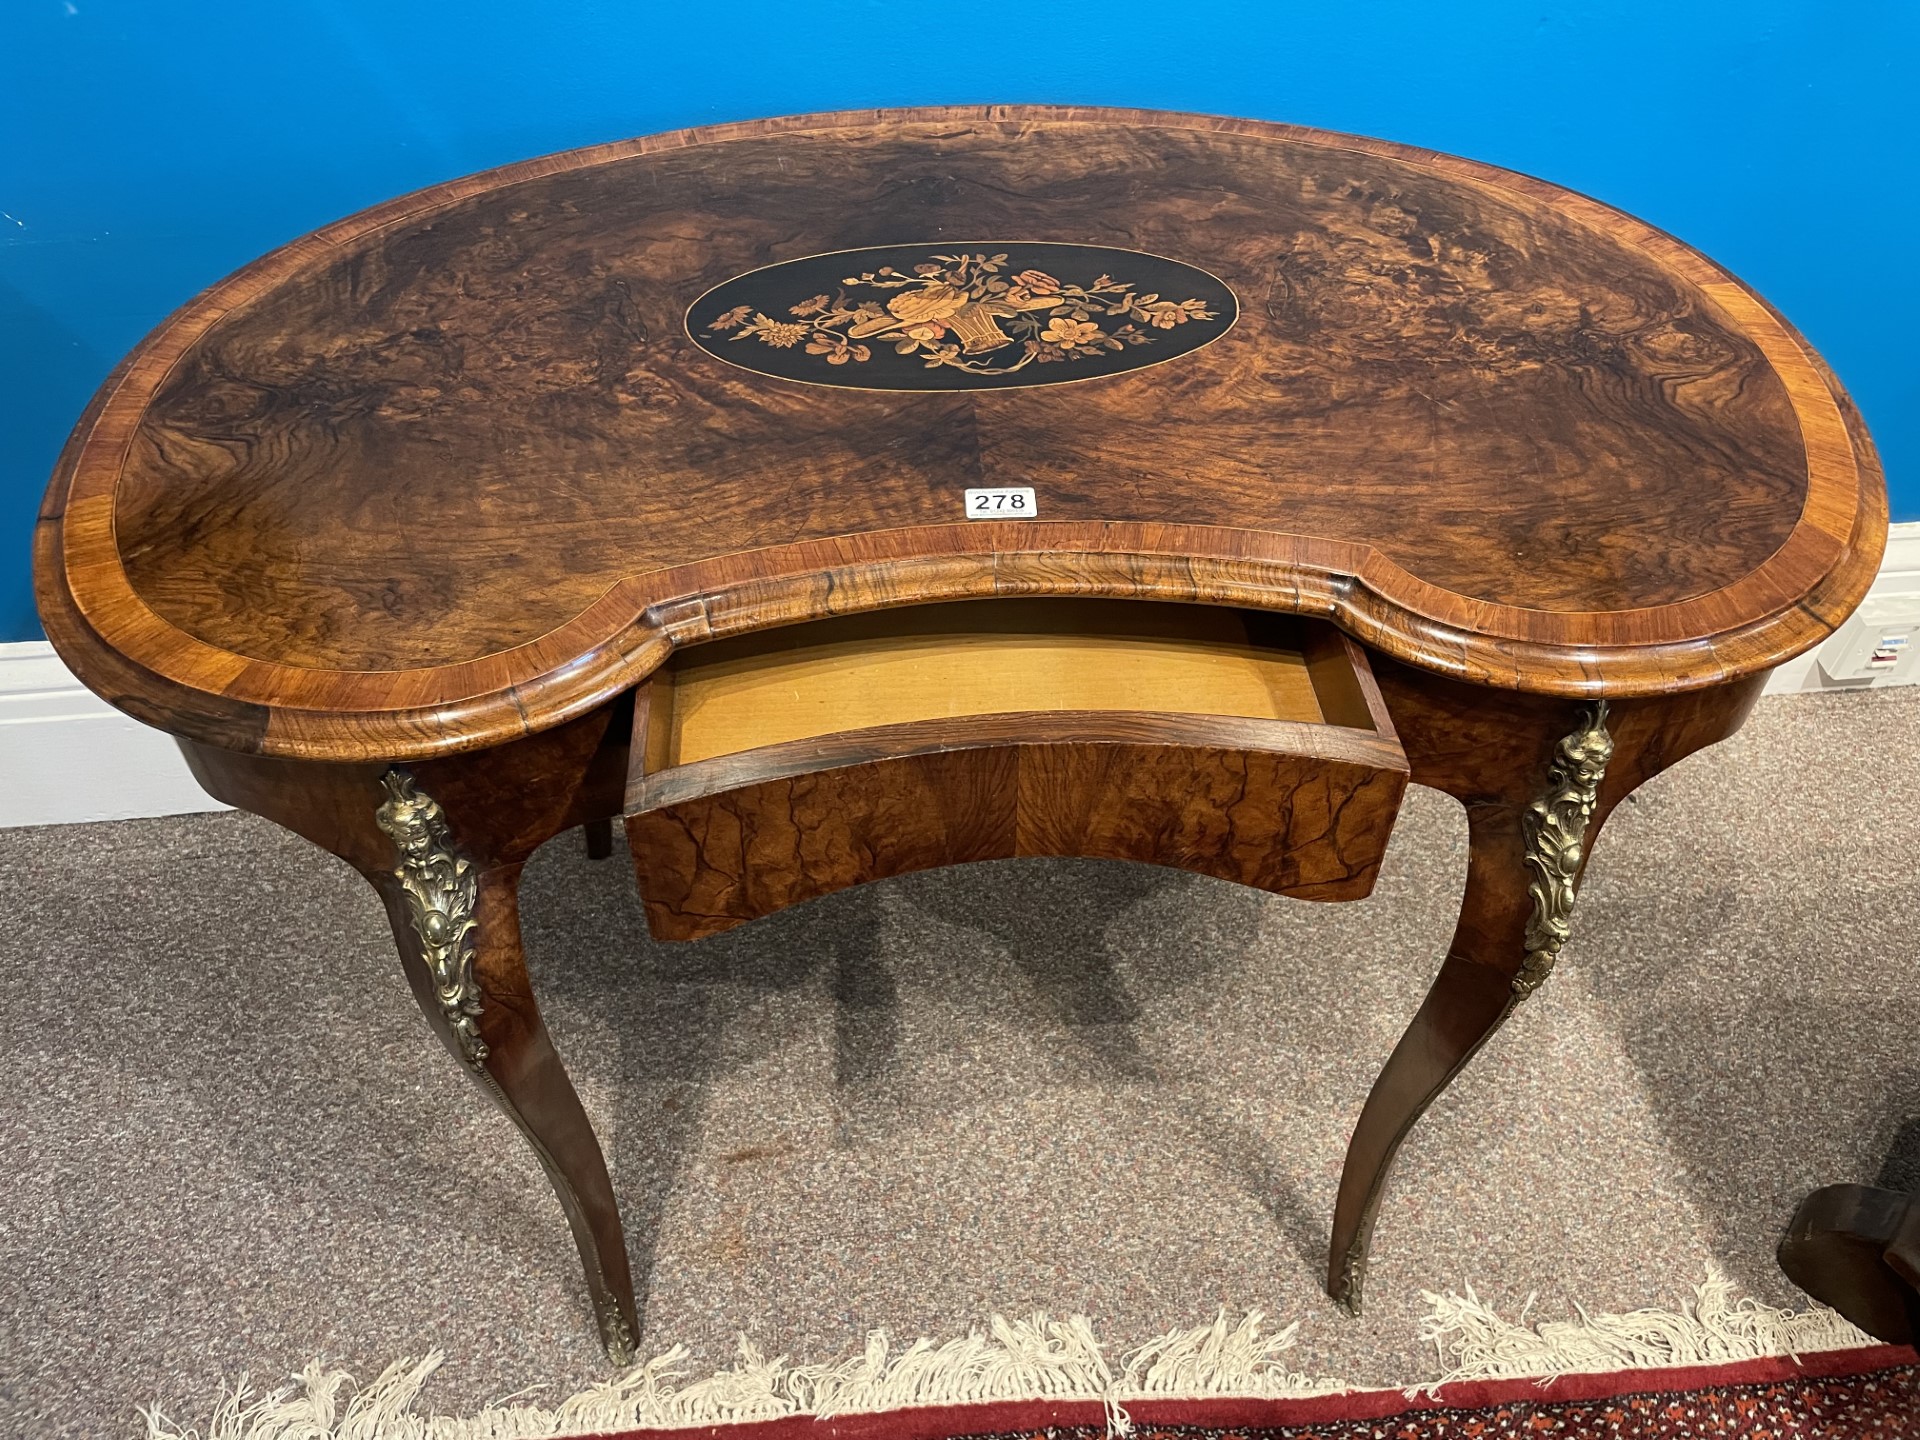 A Fine 19th Century Walnut And Inlaid Kidney Writing Table On Cabriole Legs - Image 2 of 3